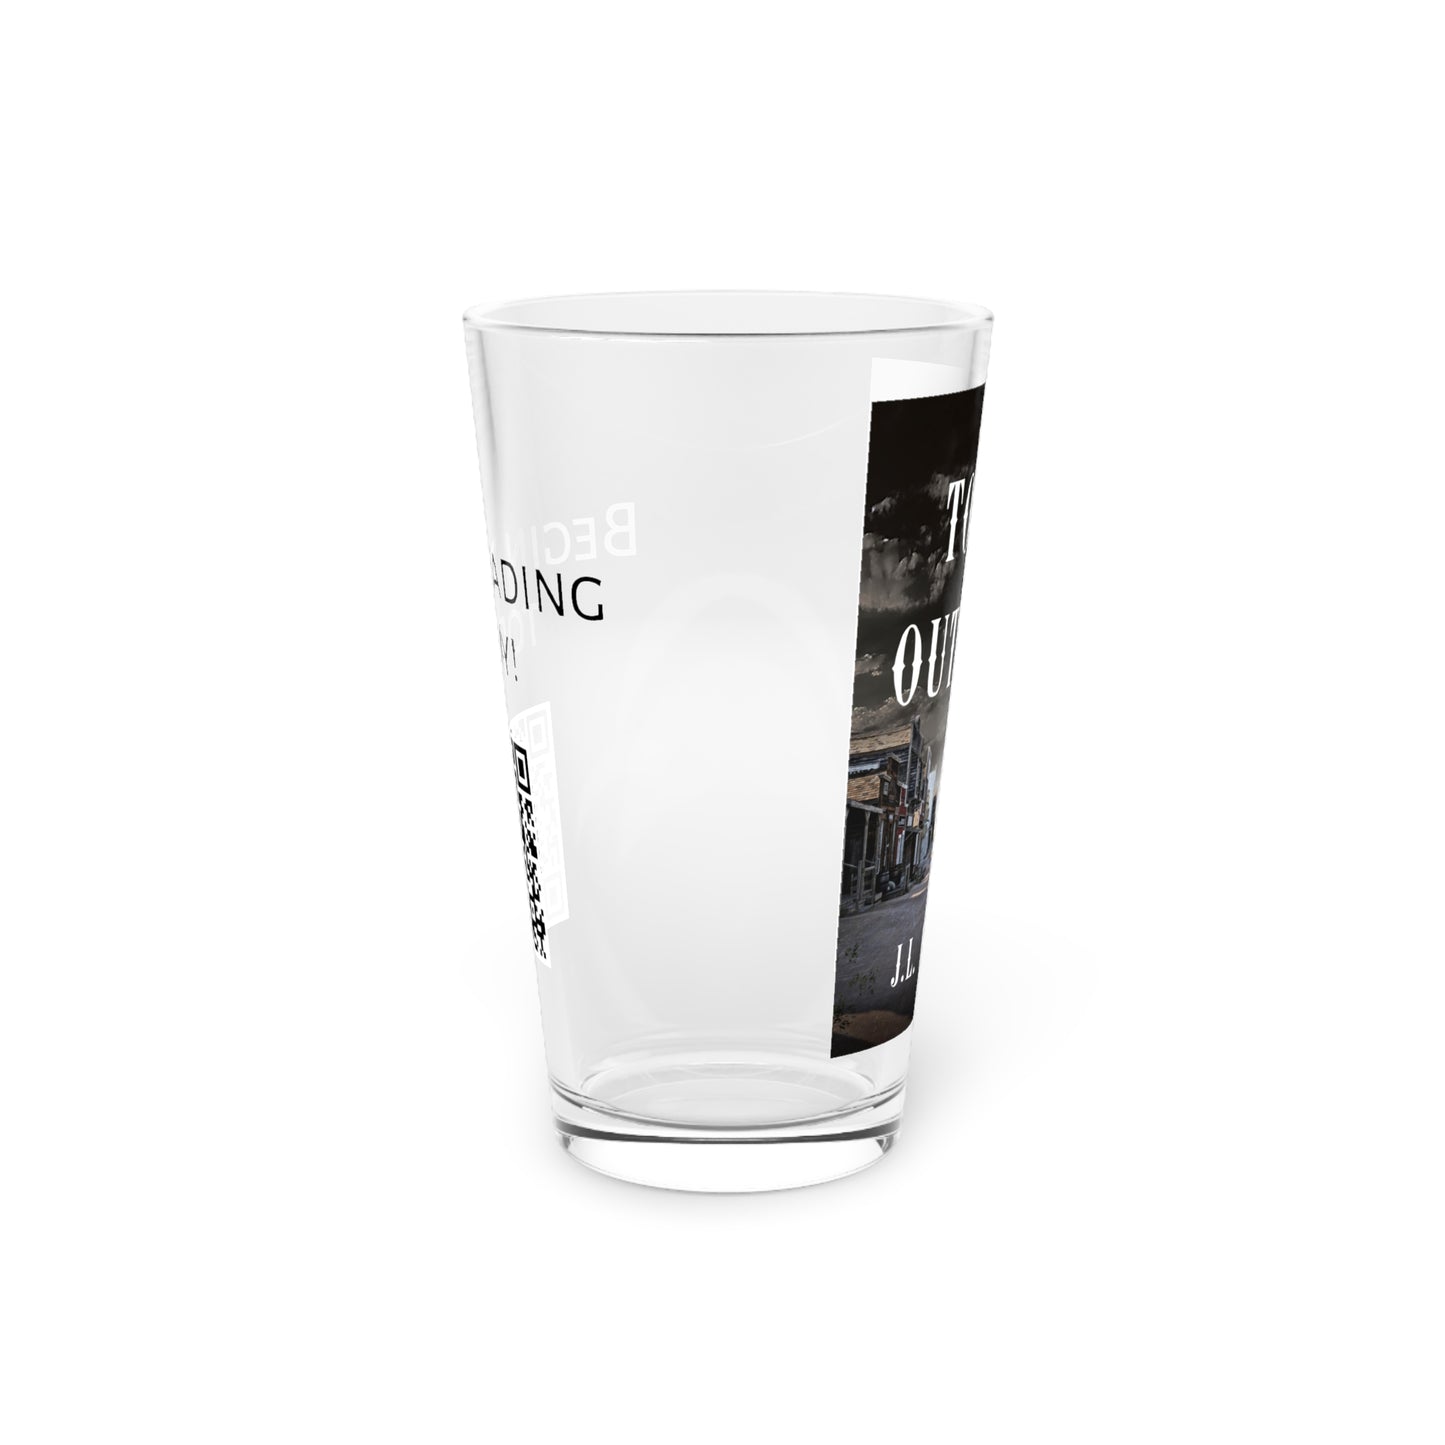 The Town Of Outlaws - Pint Glass